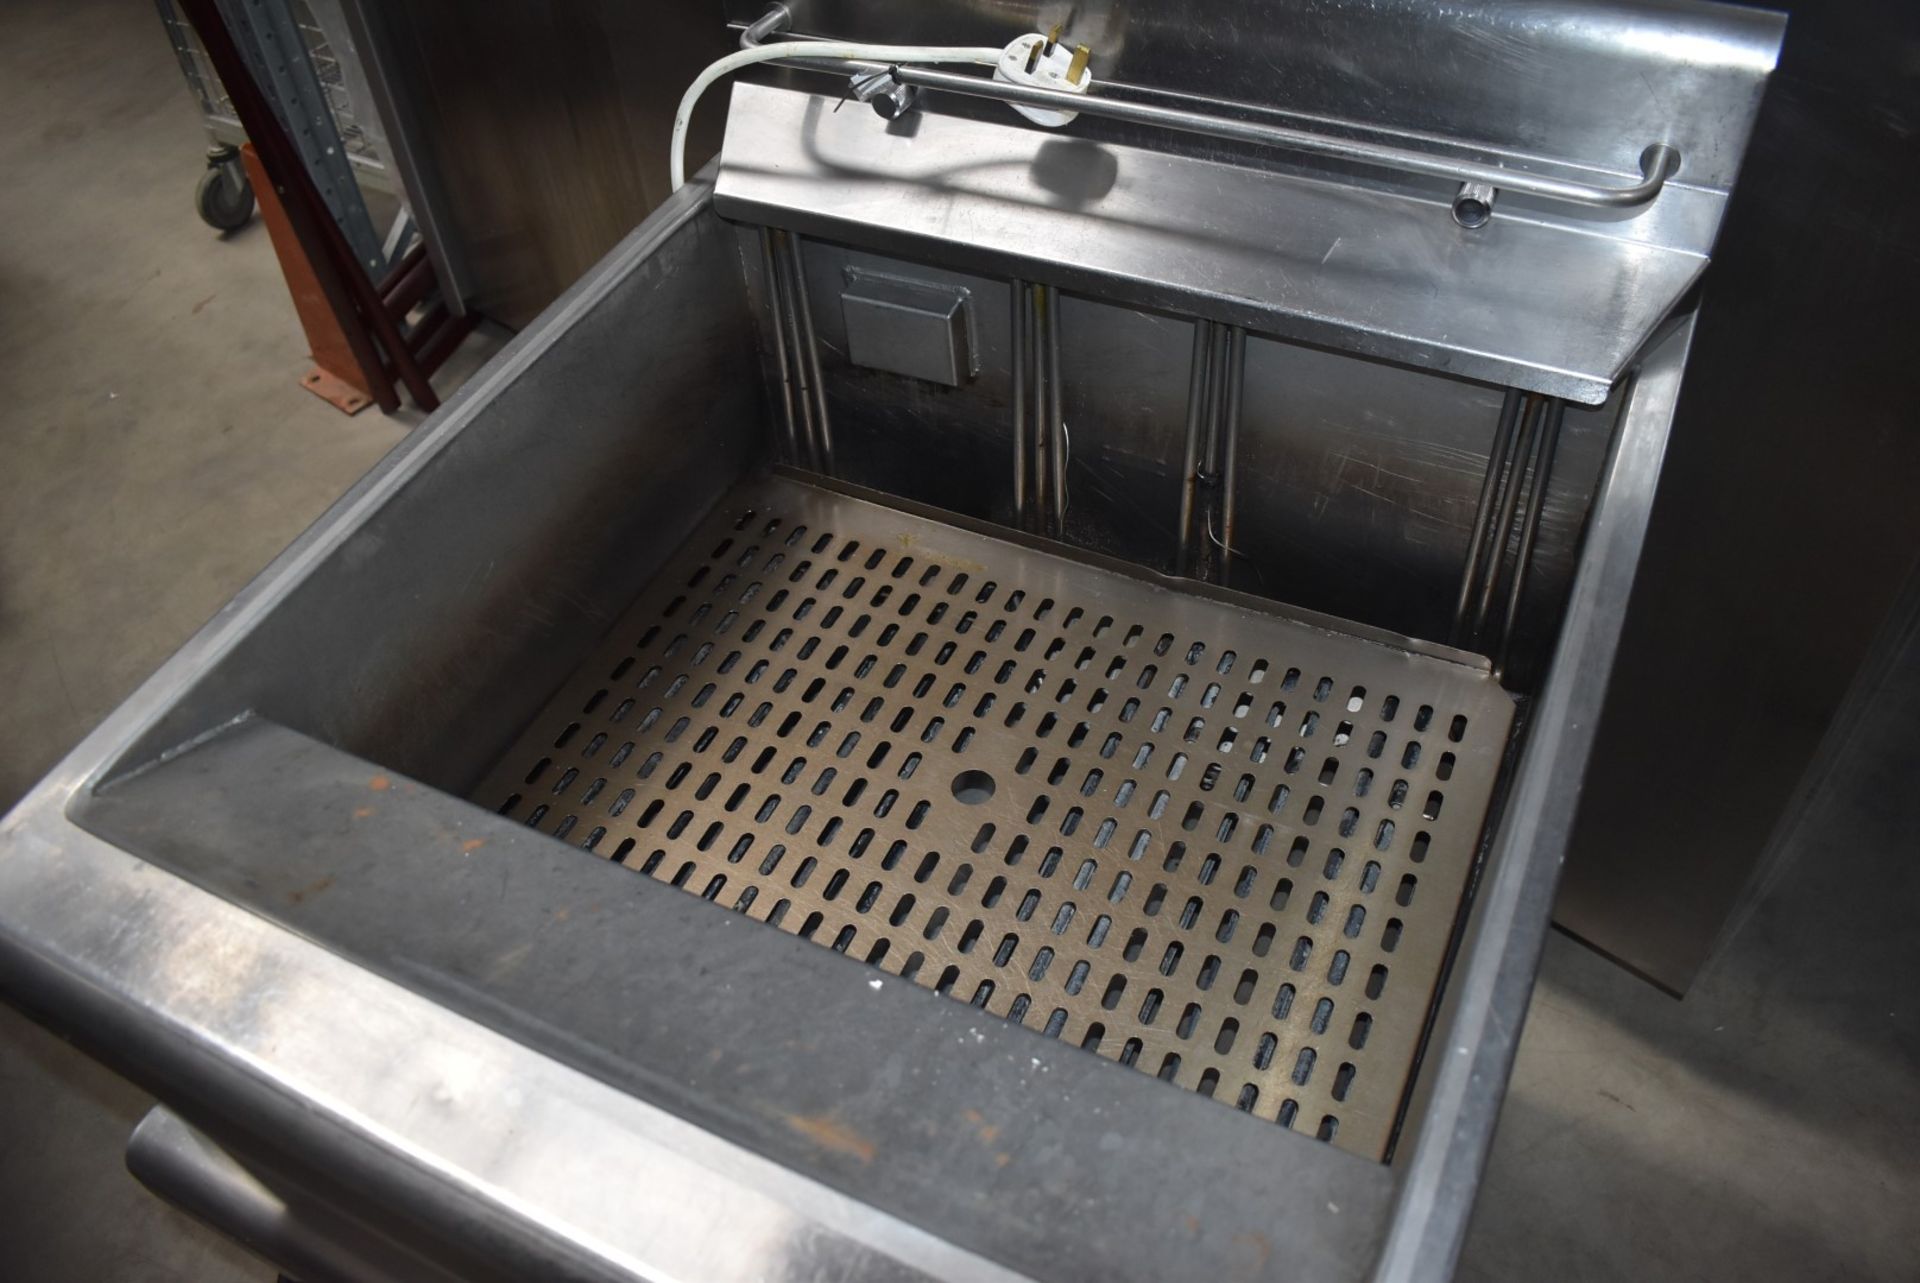 1 x Lincat Opus 700 Single Tank Electric Fryer With Built In Filtration - 3 Phase - Image 12 of 19